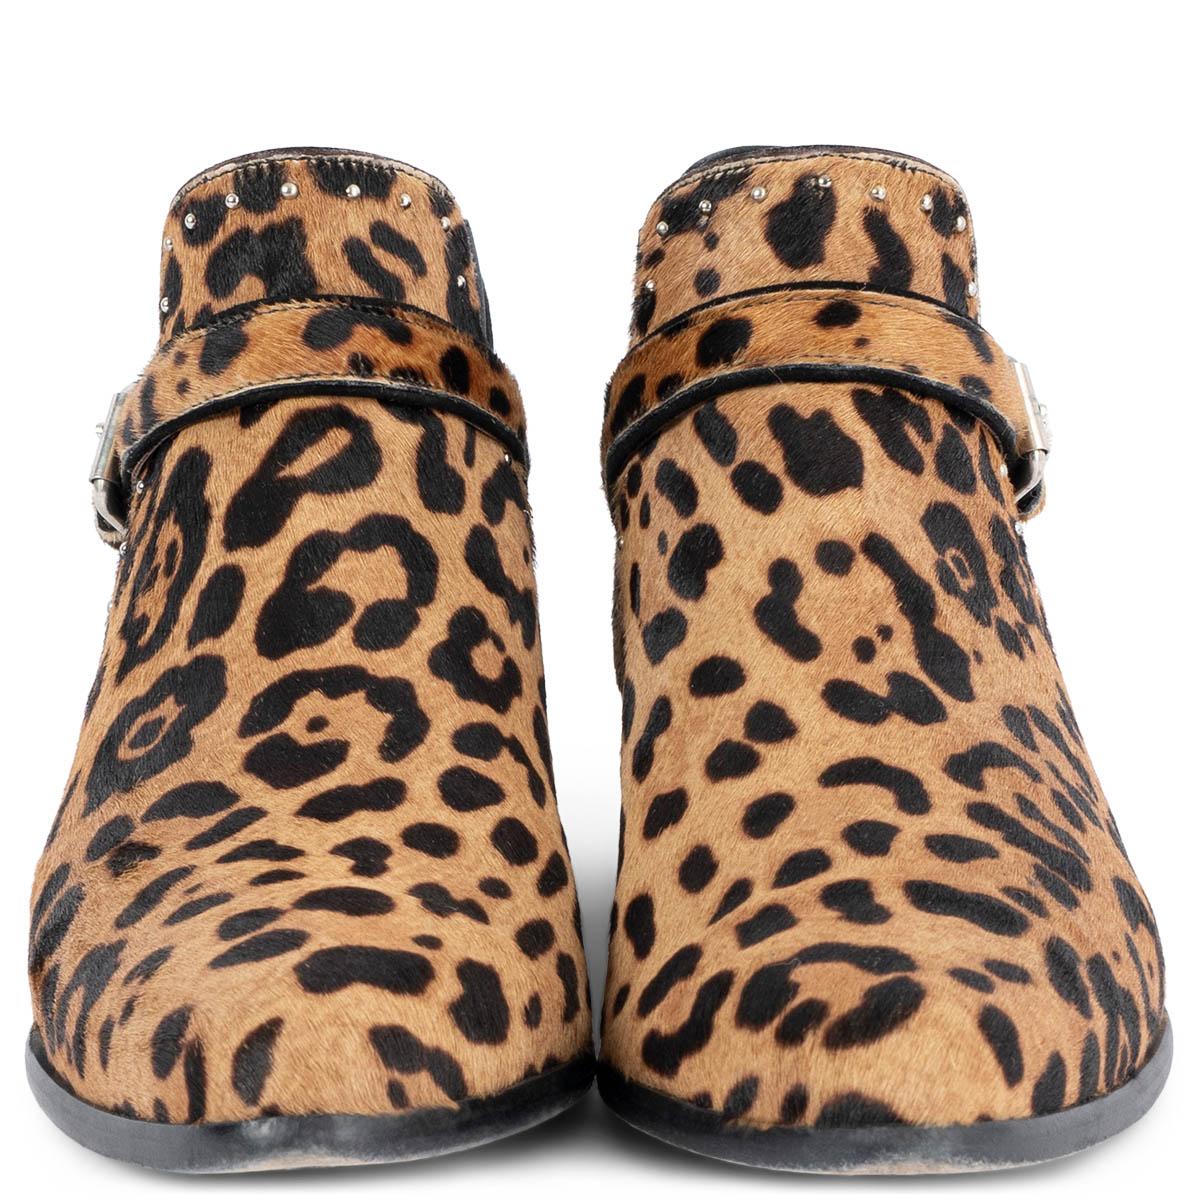 100% authentic Tabitha Simmons Gigi ankle boots in camel and espresso brown leopard print calf hair. The design features elastic inserts on the side and buckle closure. Have been worn and are in excellent condition. 

Measurements
Imprinted